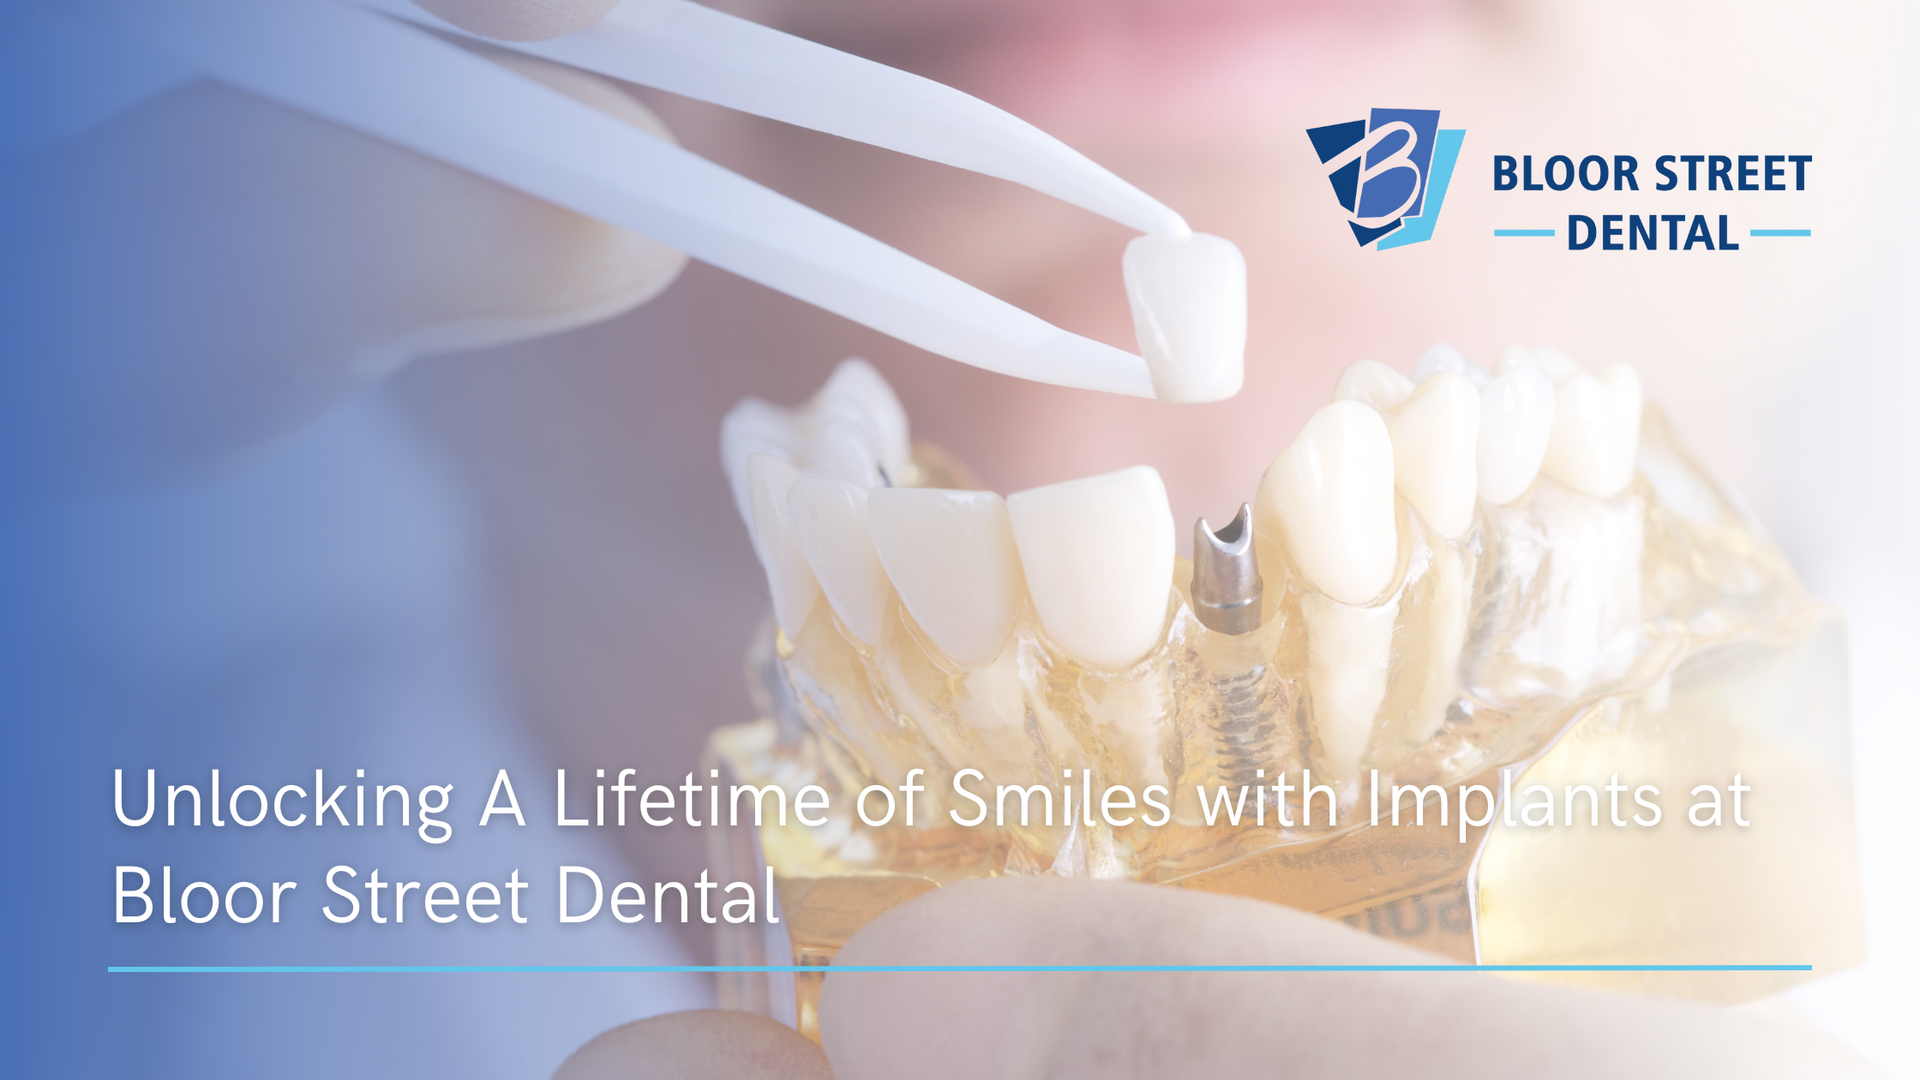 a person is unlocking a lifetime of smiles with implants at bloor street dental .